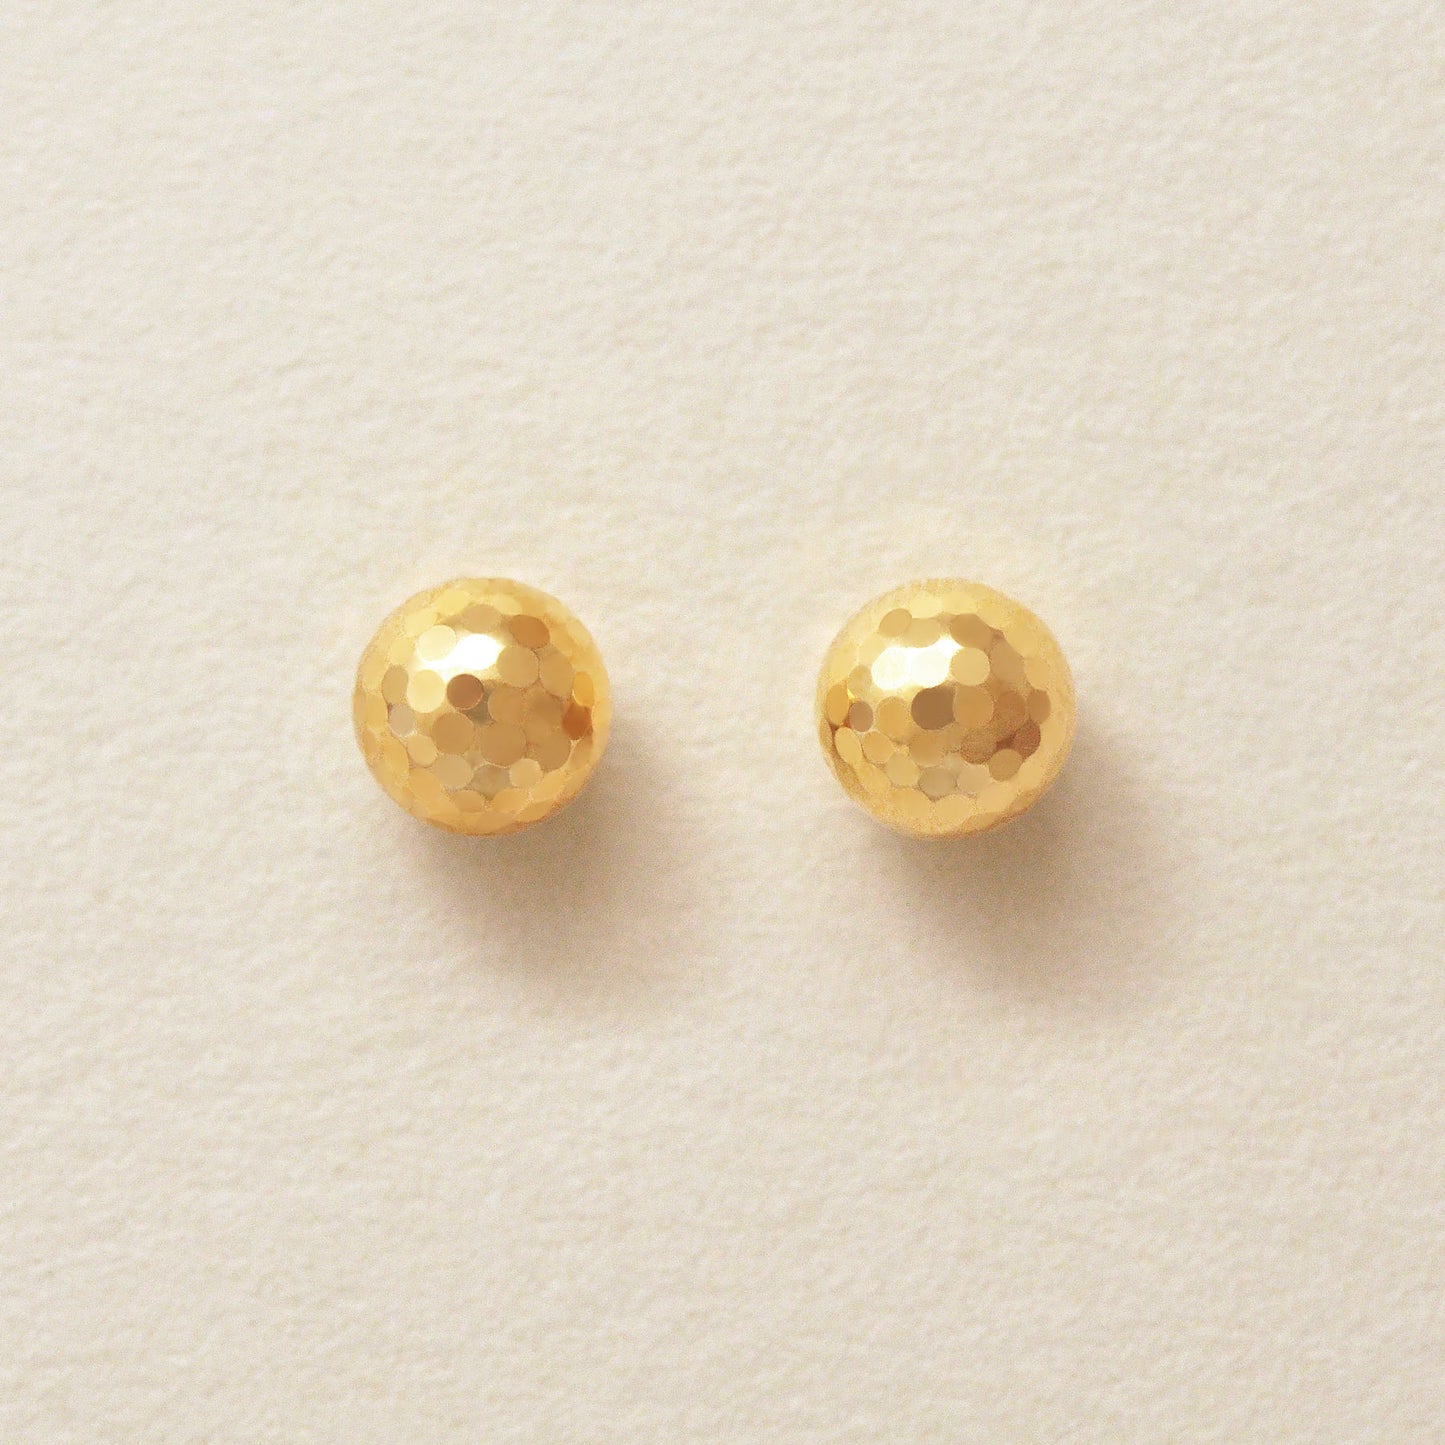 [Second Earrings] 18K Yellow Gold Mirror Ball Earrings (Φ5mm) - Product Image